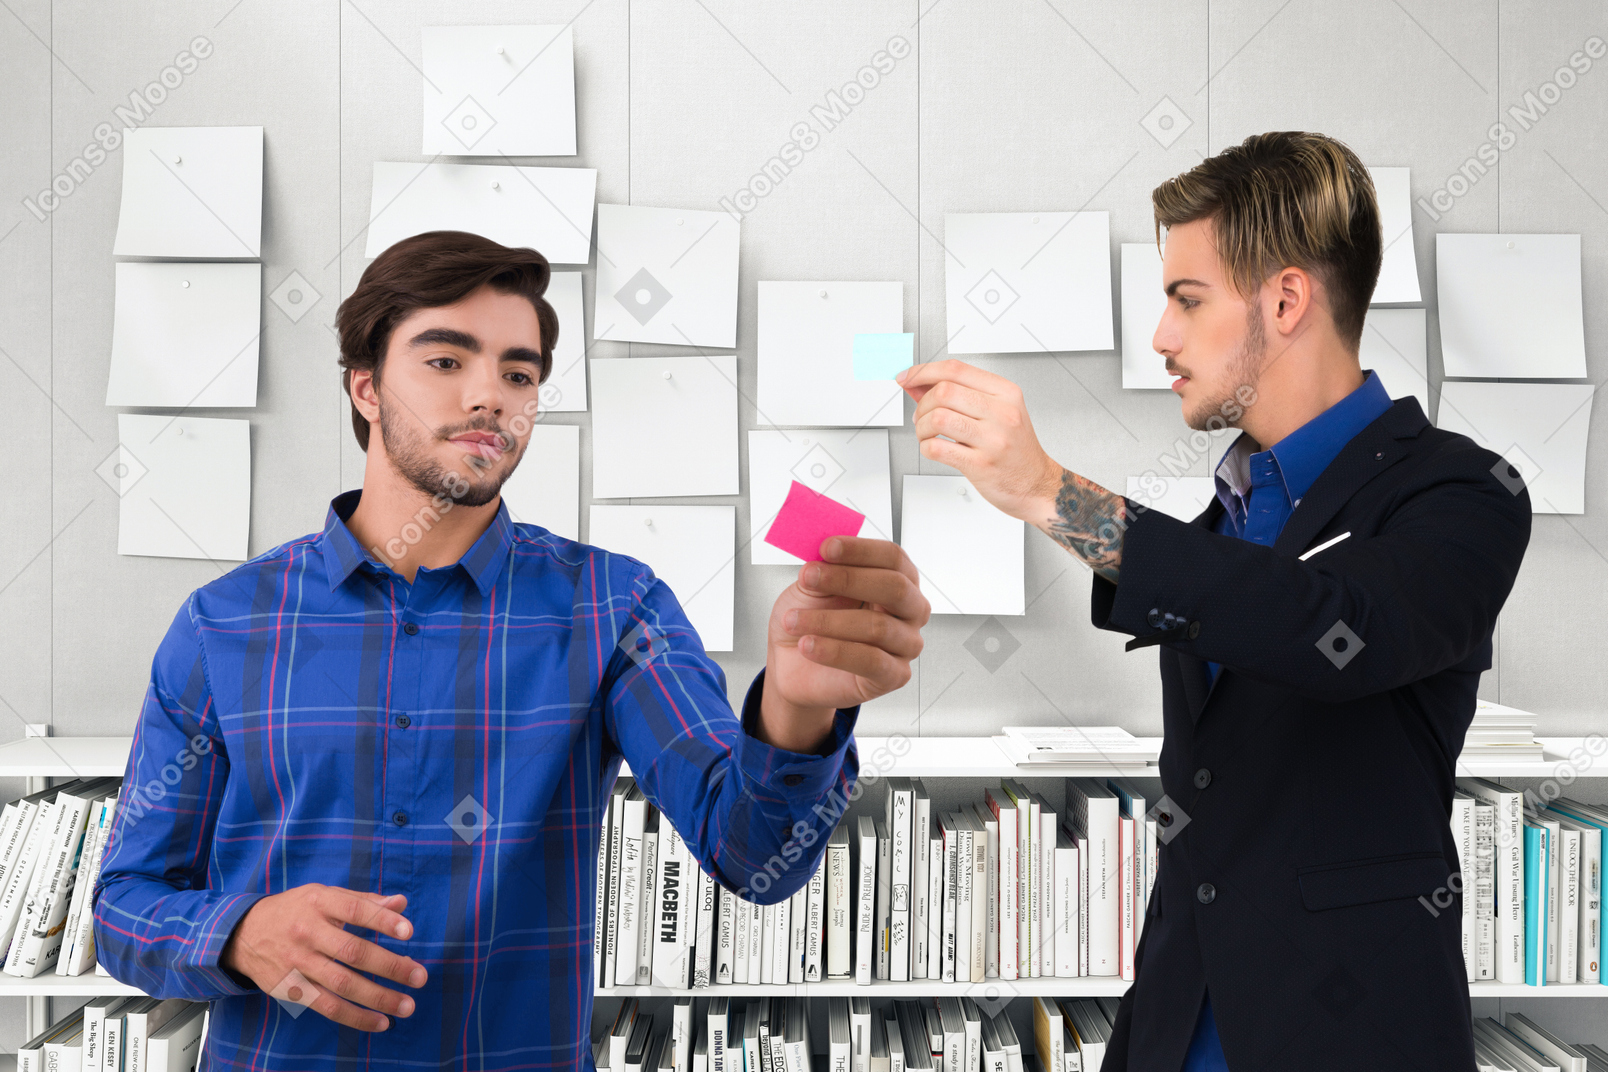 Two male office workers looking at notes and discussing something